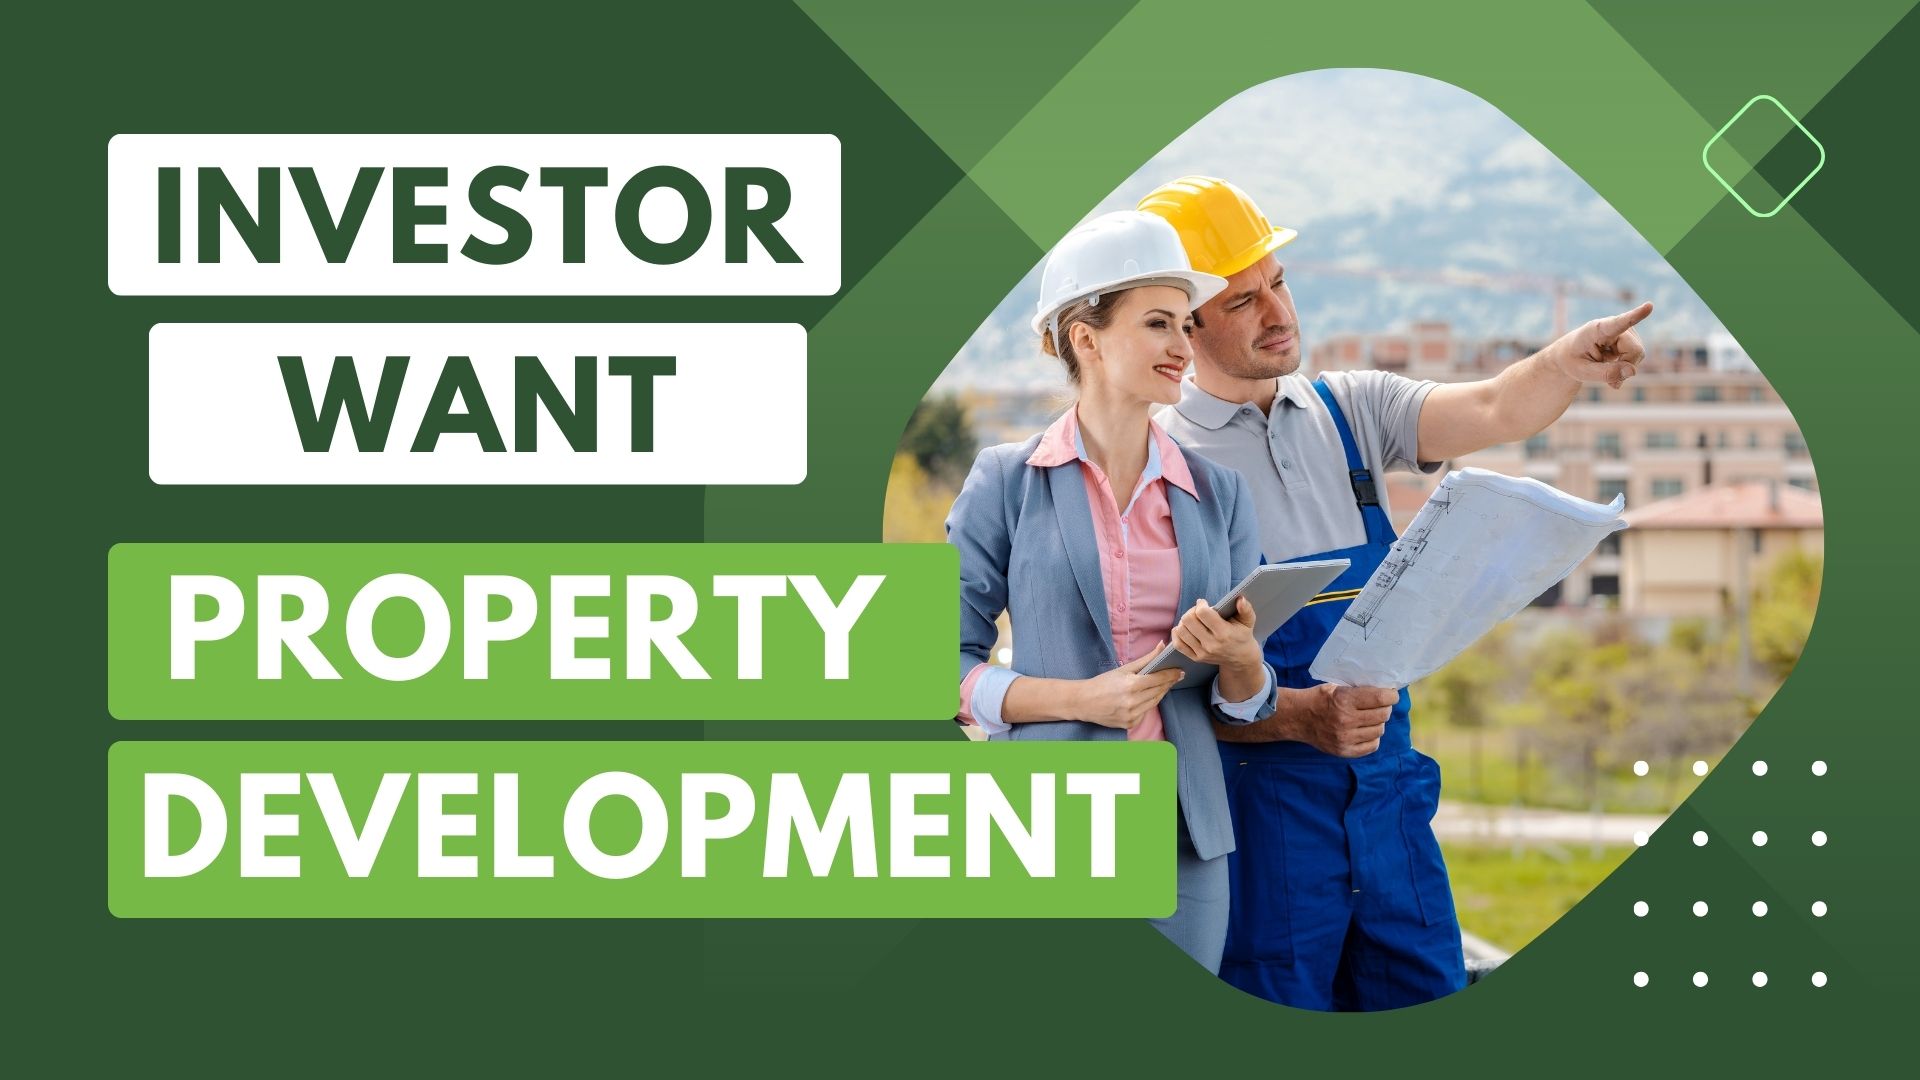 Investors Wanted for Property Development